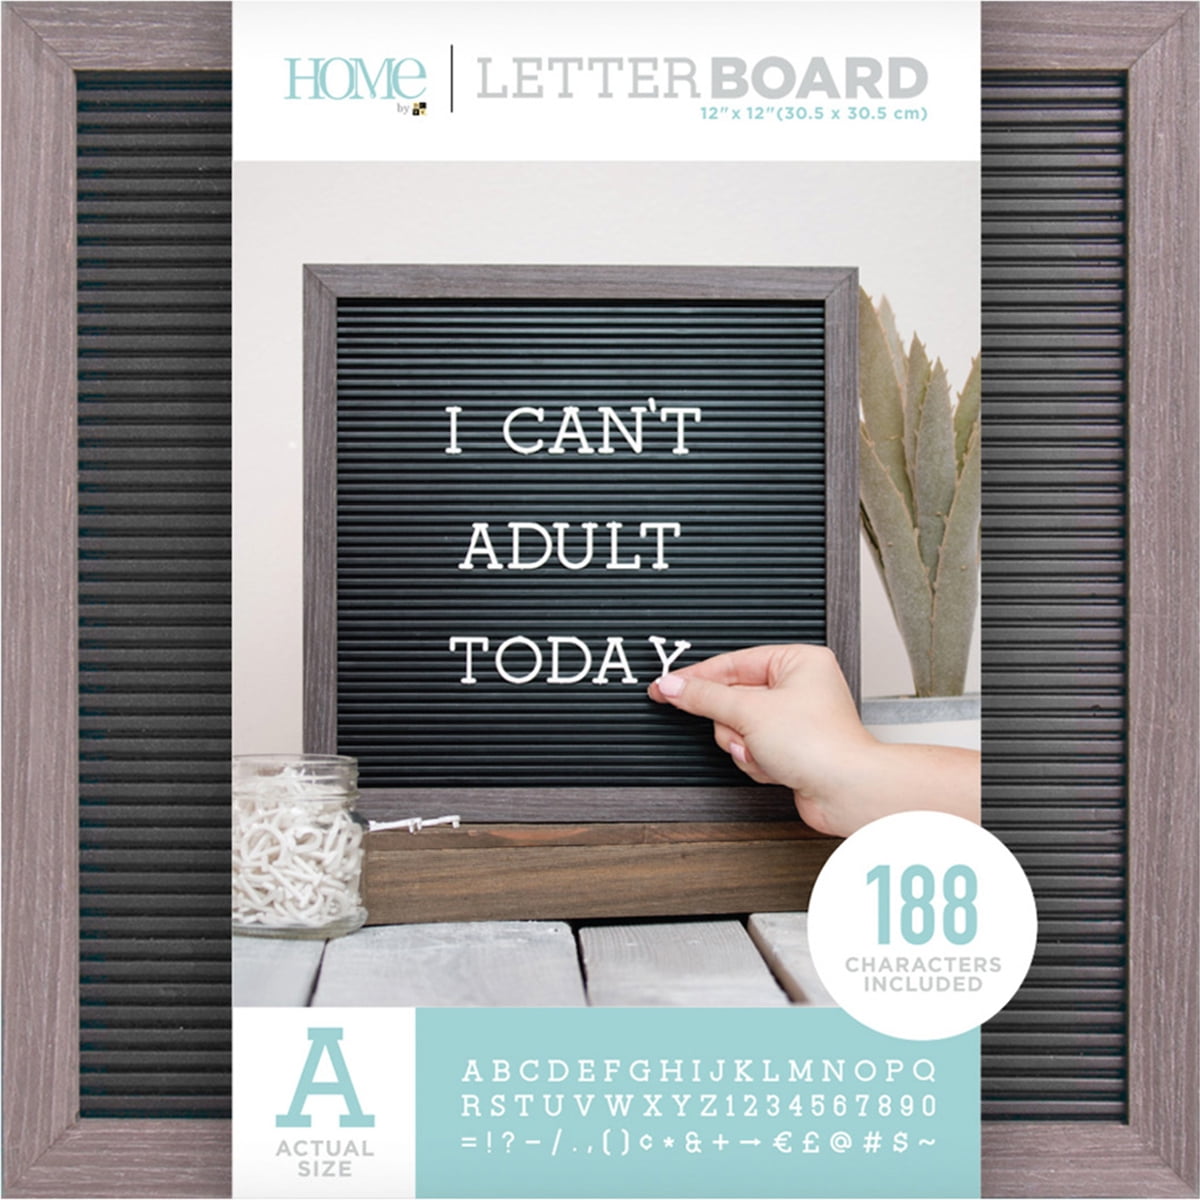 with 1 inch Letters Plastic Letter Board 12 x 12 188 Characters Include Plastic Letters Changeable Letter Boards by Atoz Create, Numbers & Symbols Grey Frame & Black Board 